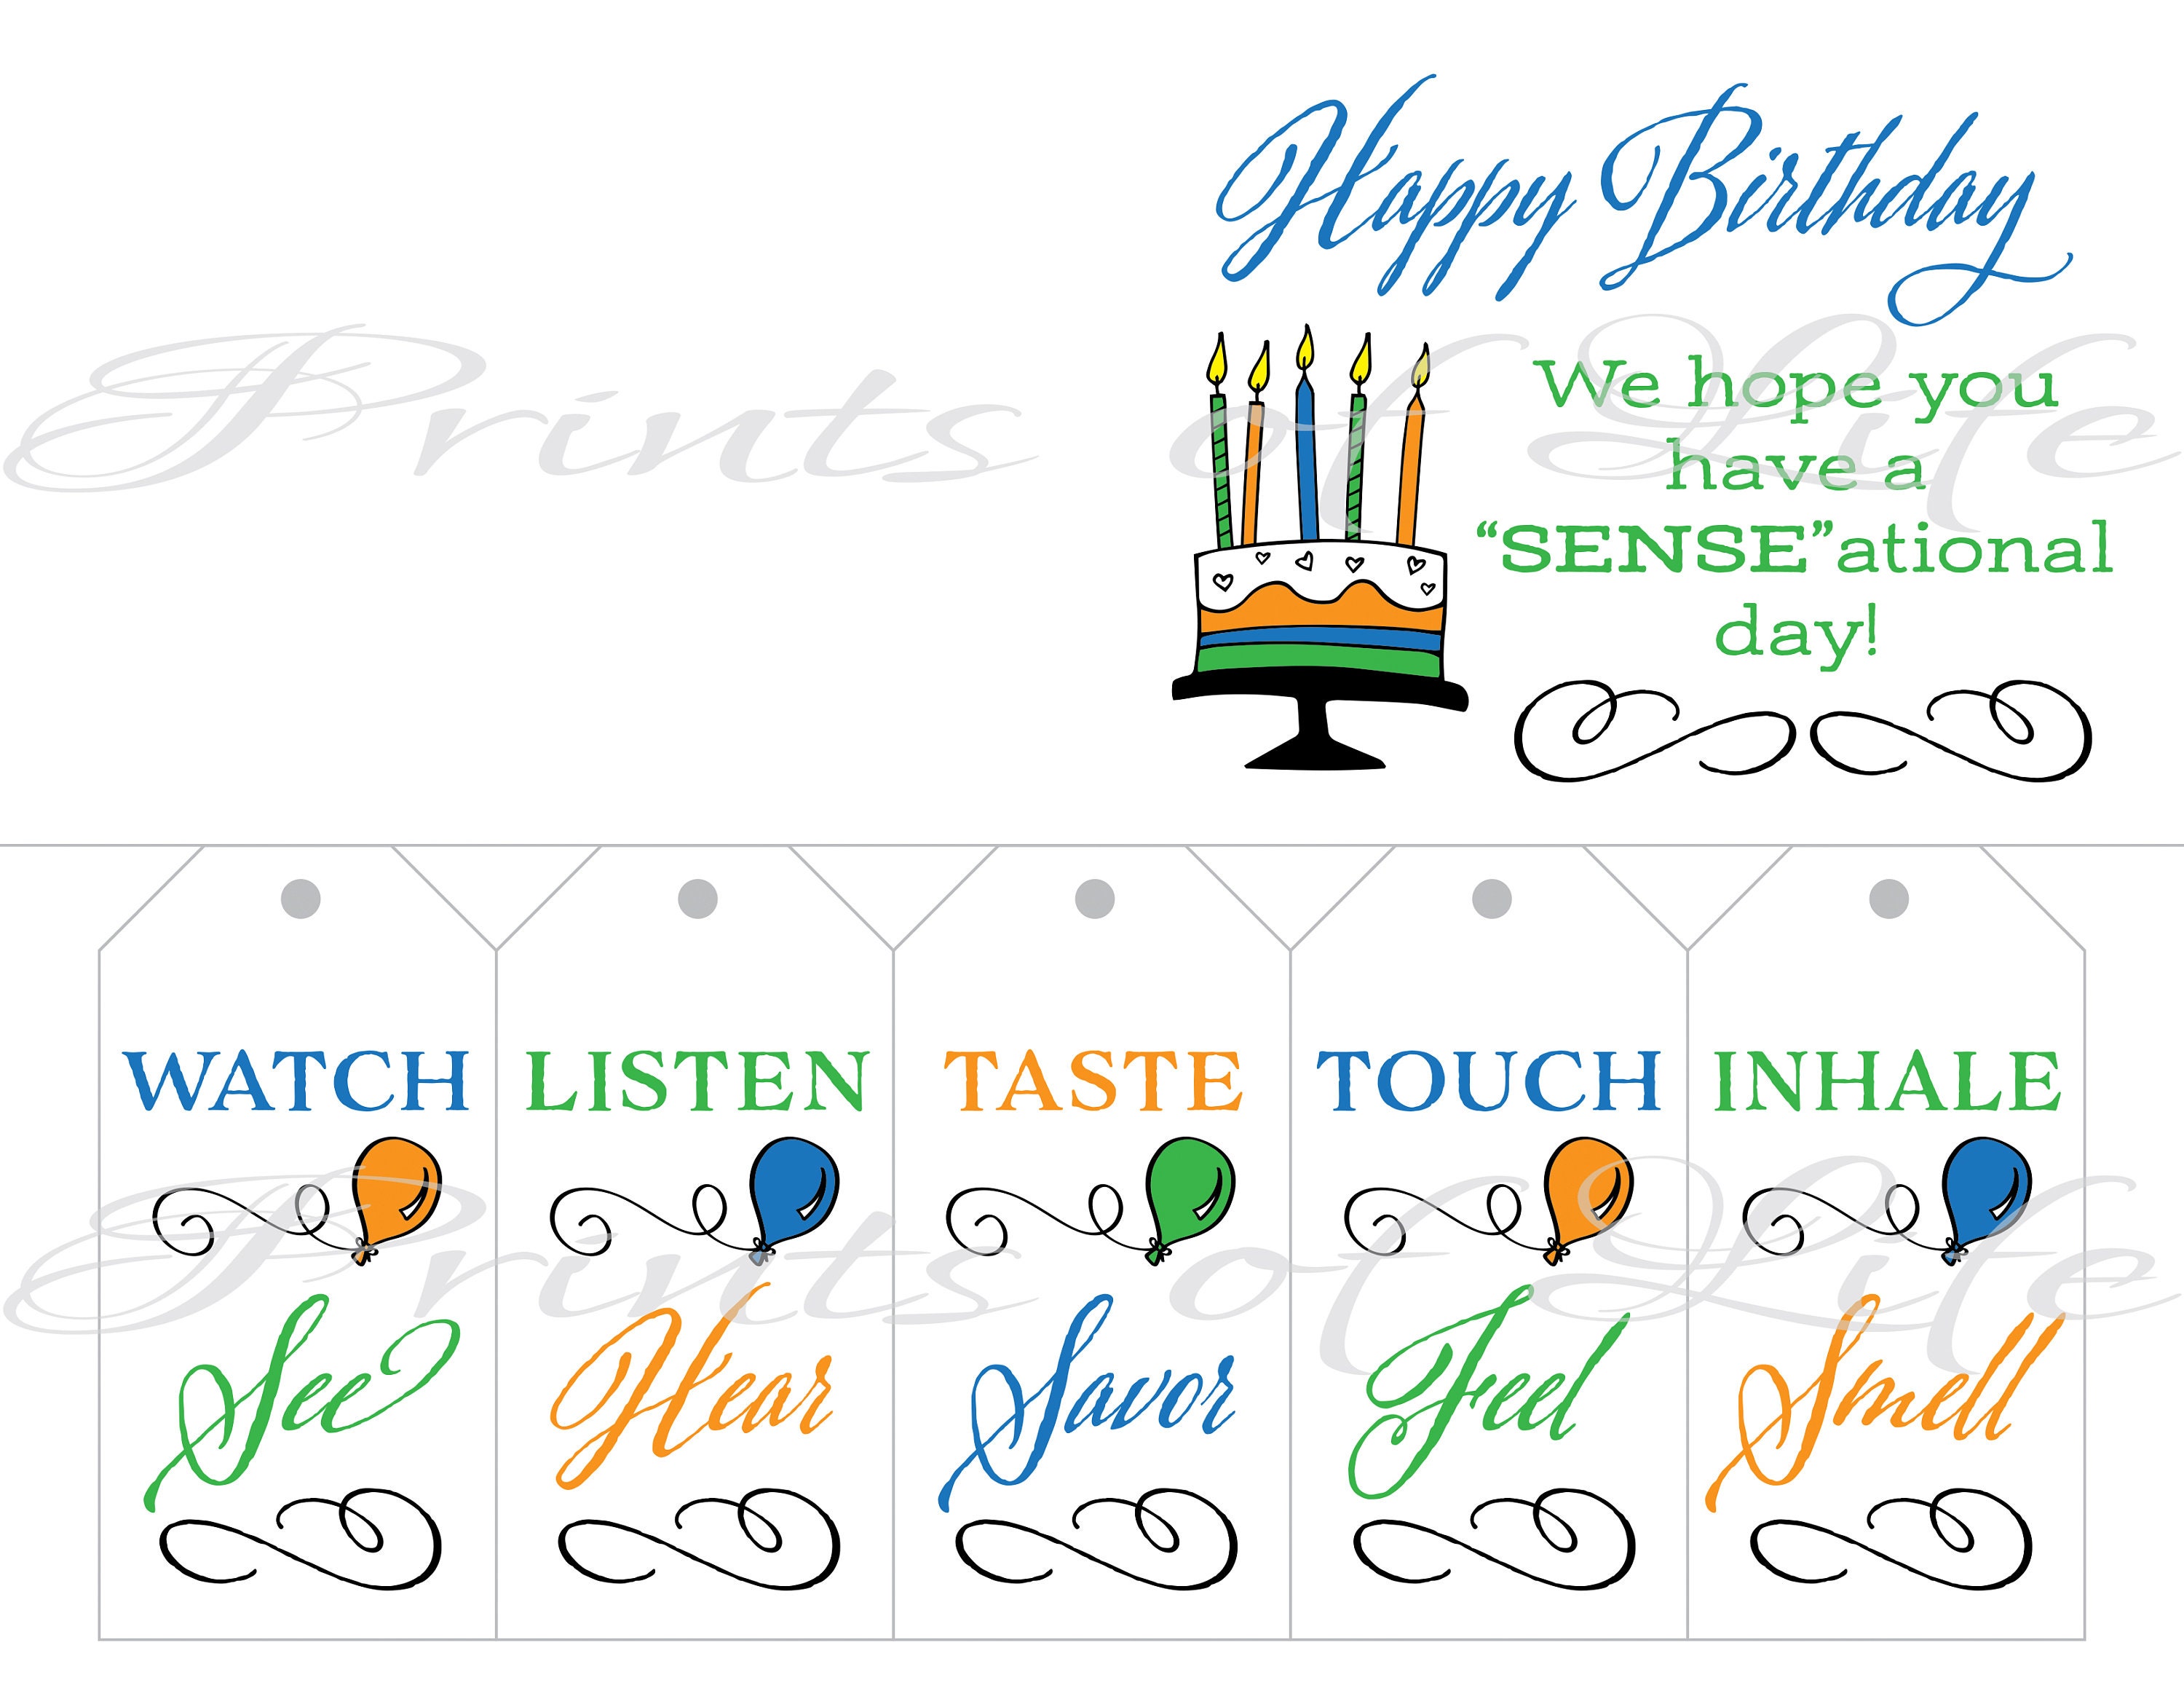 Five Senses Gift Bags by @noted.ink  Birthday presents for dad, Bff  birthday gift, Five senses gift